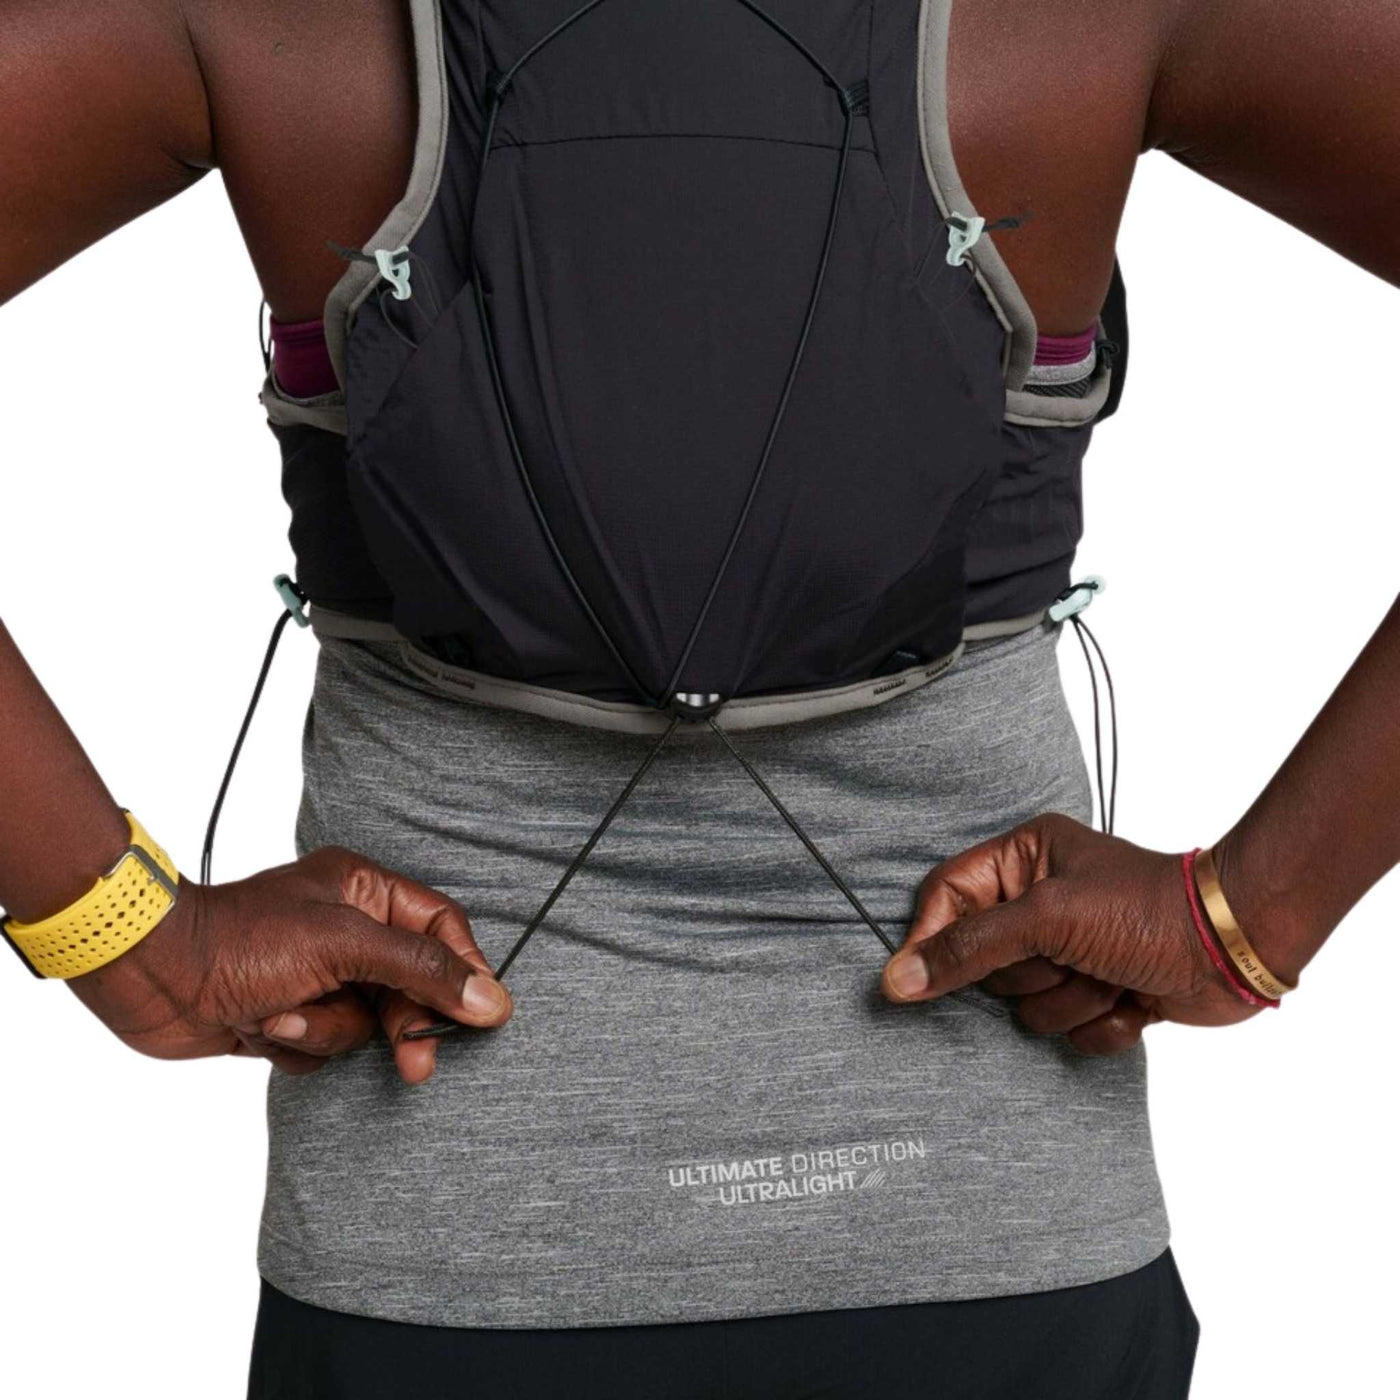 Ultimate Direction Race Vesta 6.0 | Women's Hydration Packs and Vests NZ | Further Faster Christchurch NZ #onyx